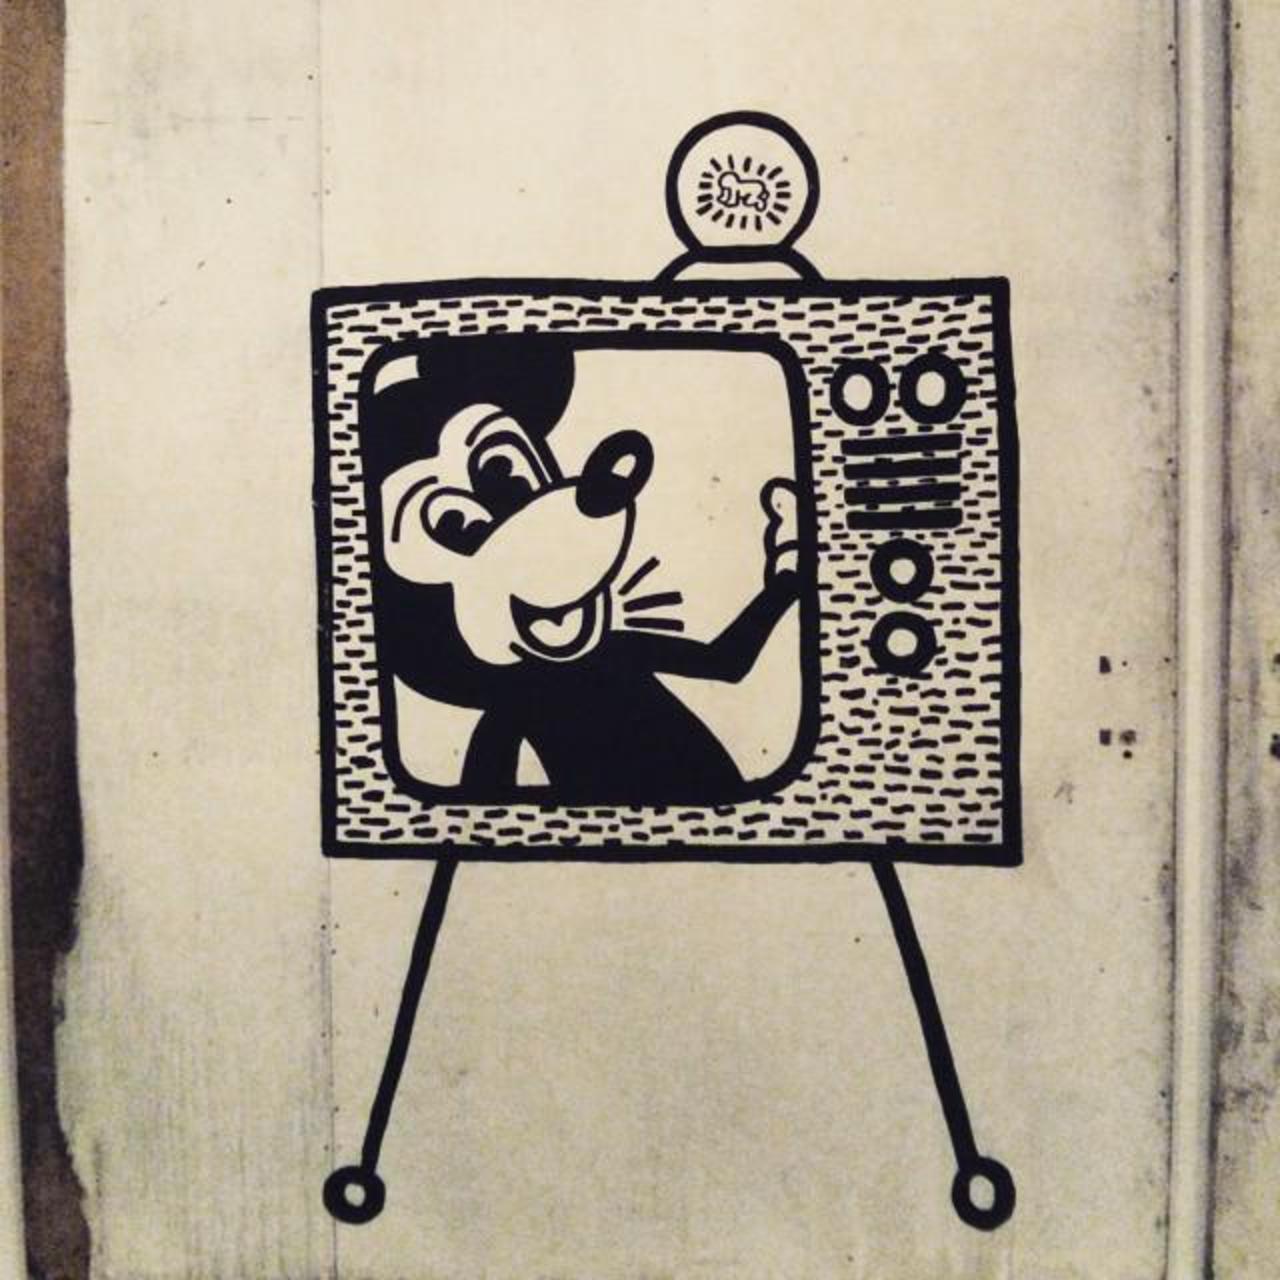 #keithharing #mickey #mouse #tv #art #keith #haring #popart #pop #culture #mam #mamparis #graffiti #graffitiart #co… http://t.co/X65l8qYDsN